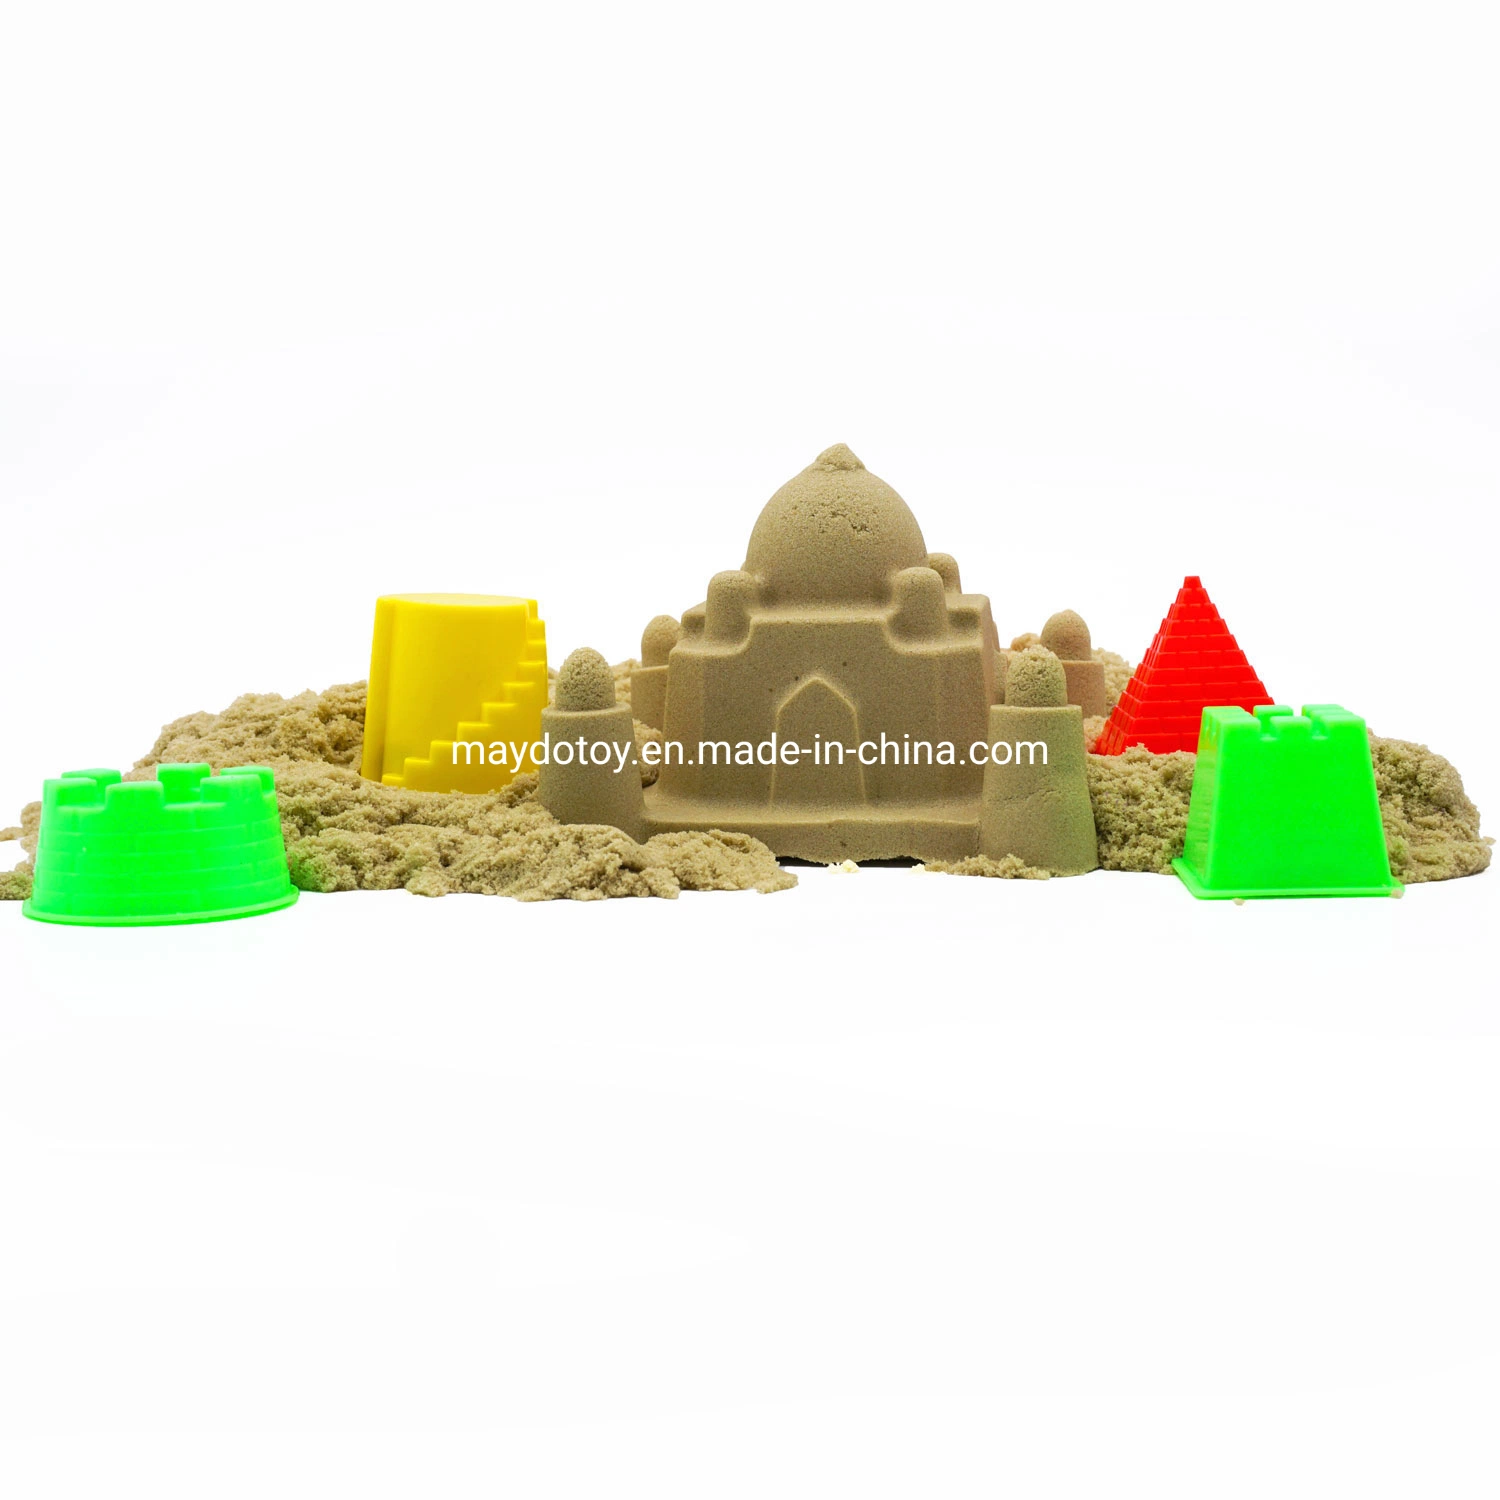 High quality/High cost performance  Magic Natural Sand DIY Kinetic Sand Toy for Kids Play